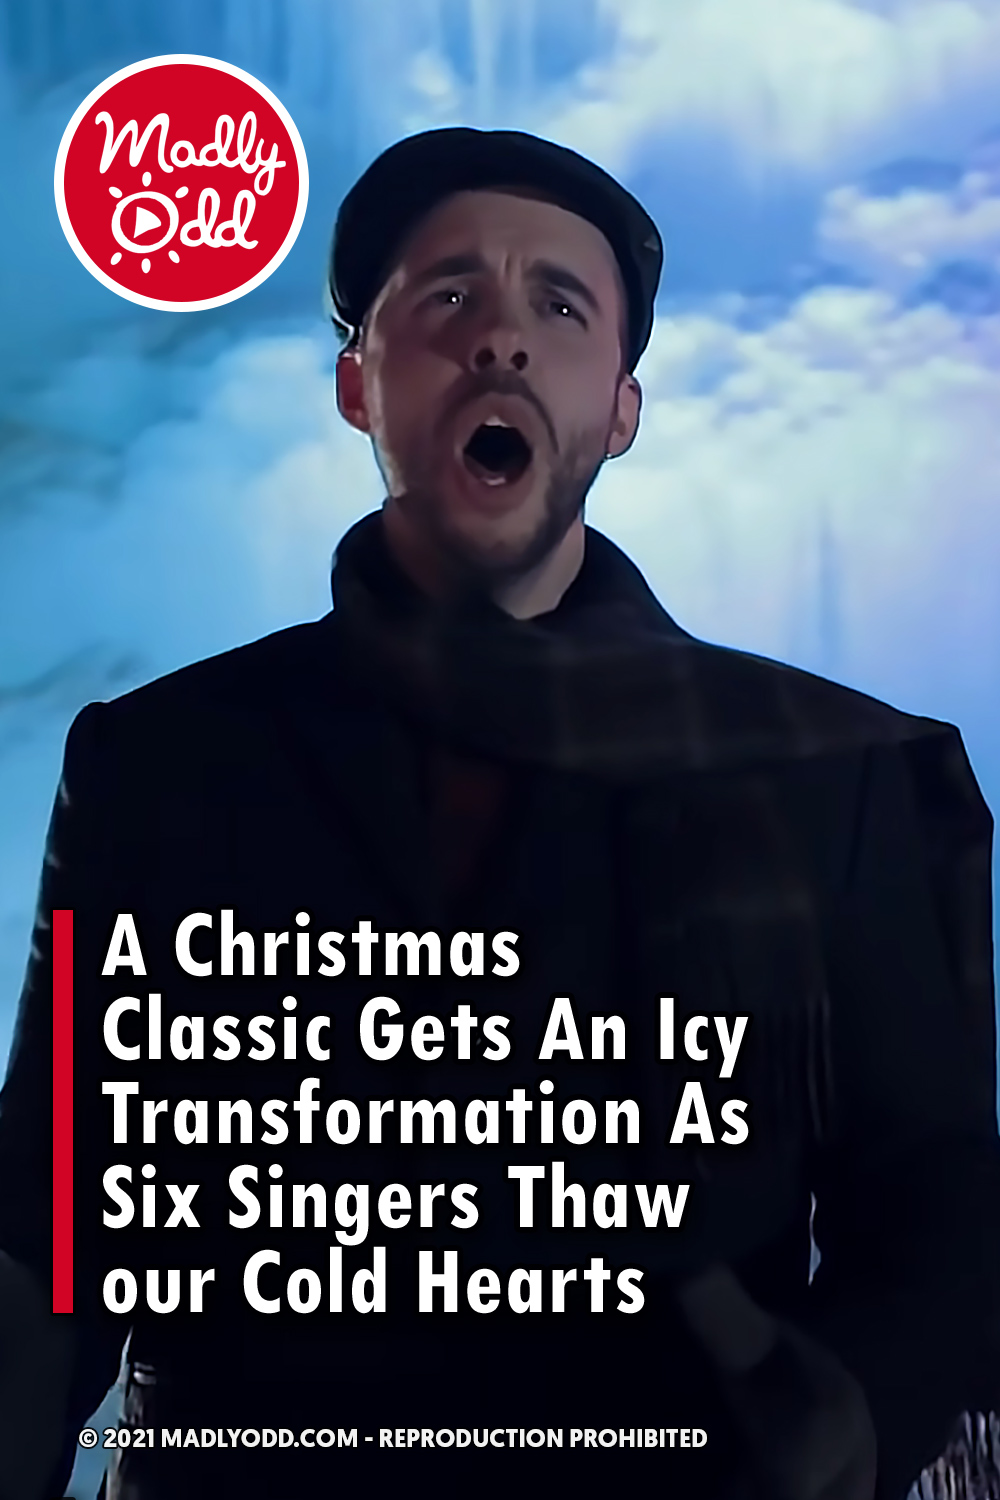 A Christmas Classic Gets An Icy Transformation As Six Singers Thaw our Cold Hearts